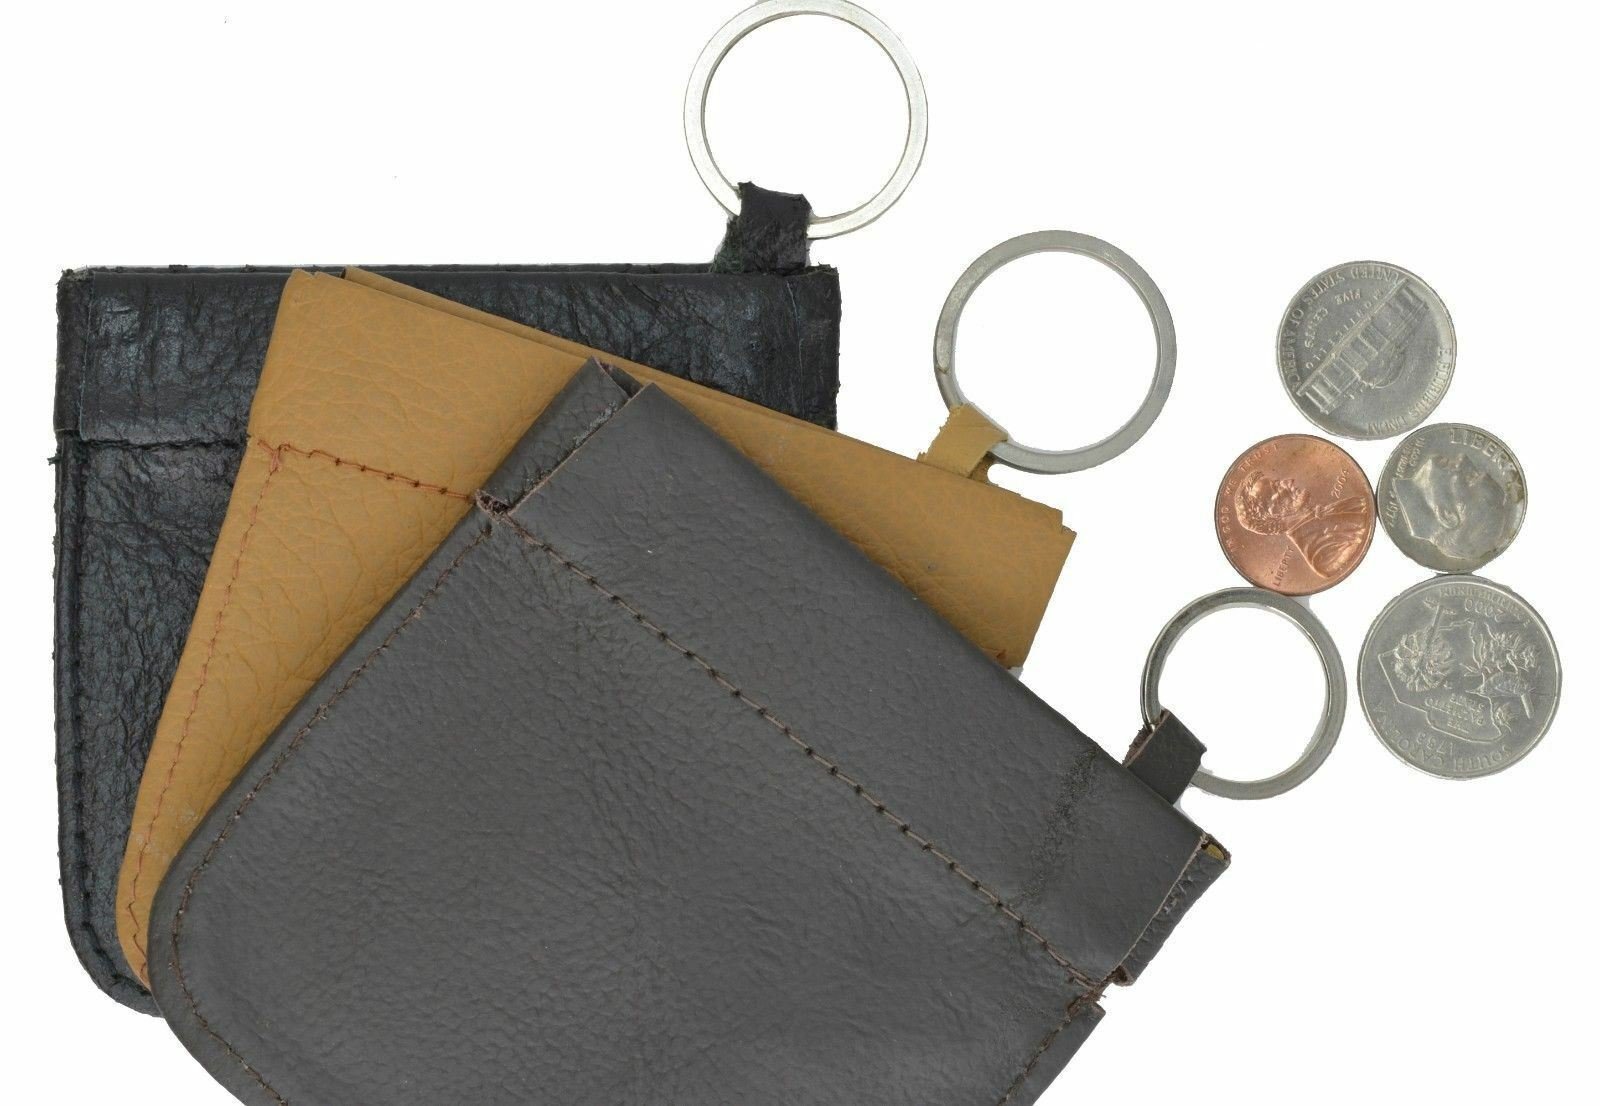 New Small Squeeze Leather Change Coin Money Purse W/ Key Ring Gift